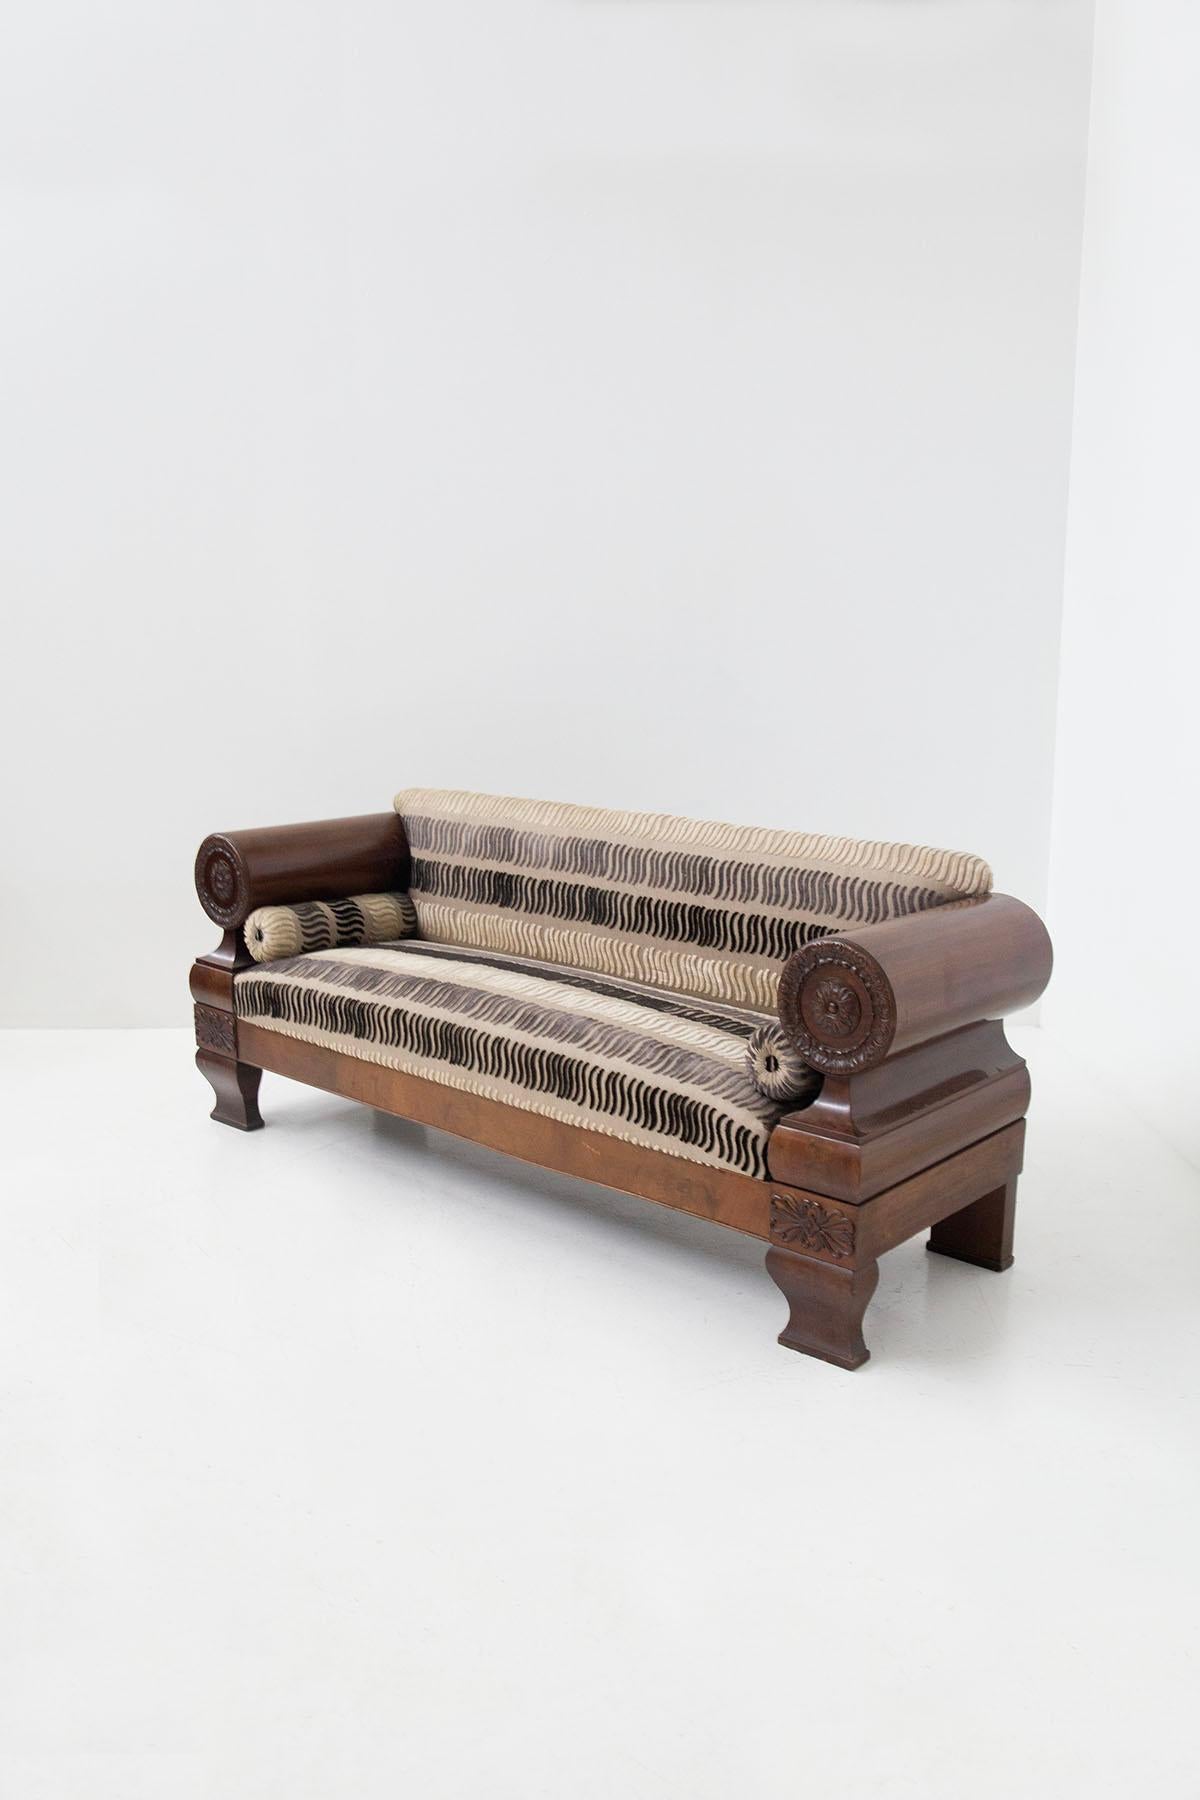 Impressive Biedermeier sofa of Northern European origin from the early 1900s. The majestic sofa features a colossal wooden frame with several special features. We notice at the sides two large wooden arm rests with a finely carved wood rosette of